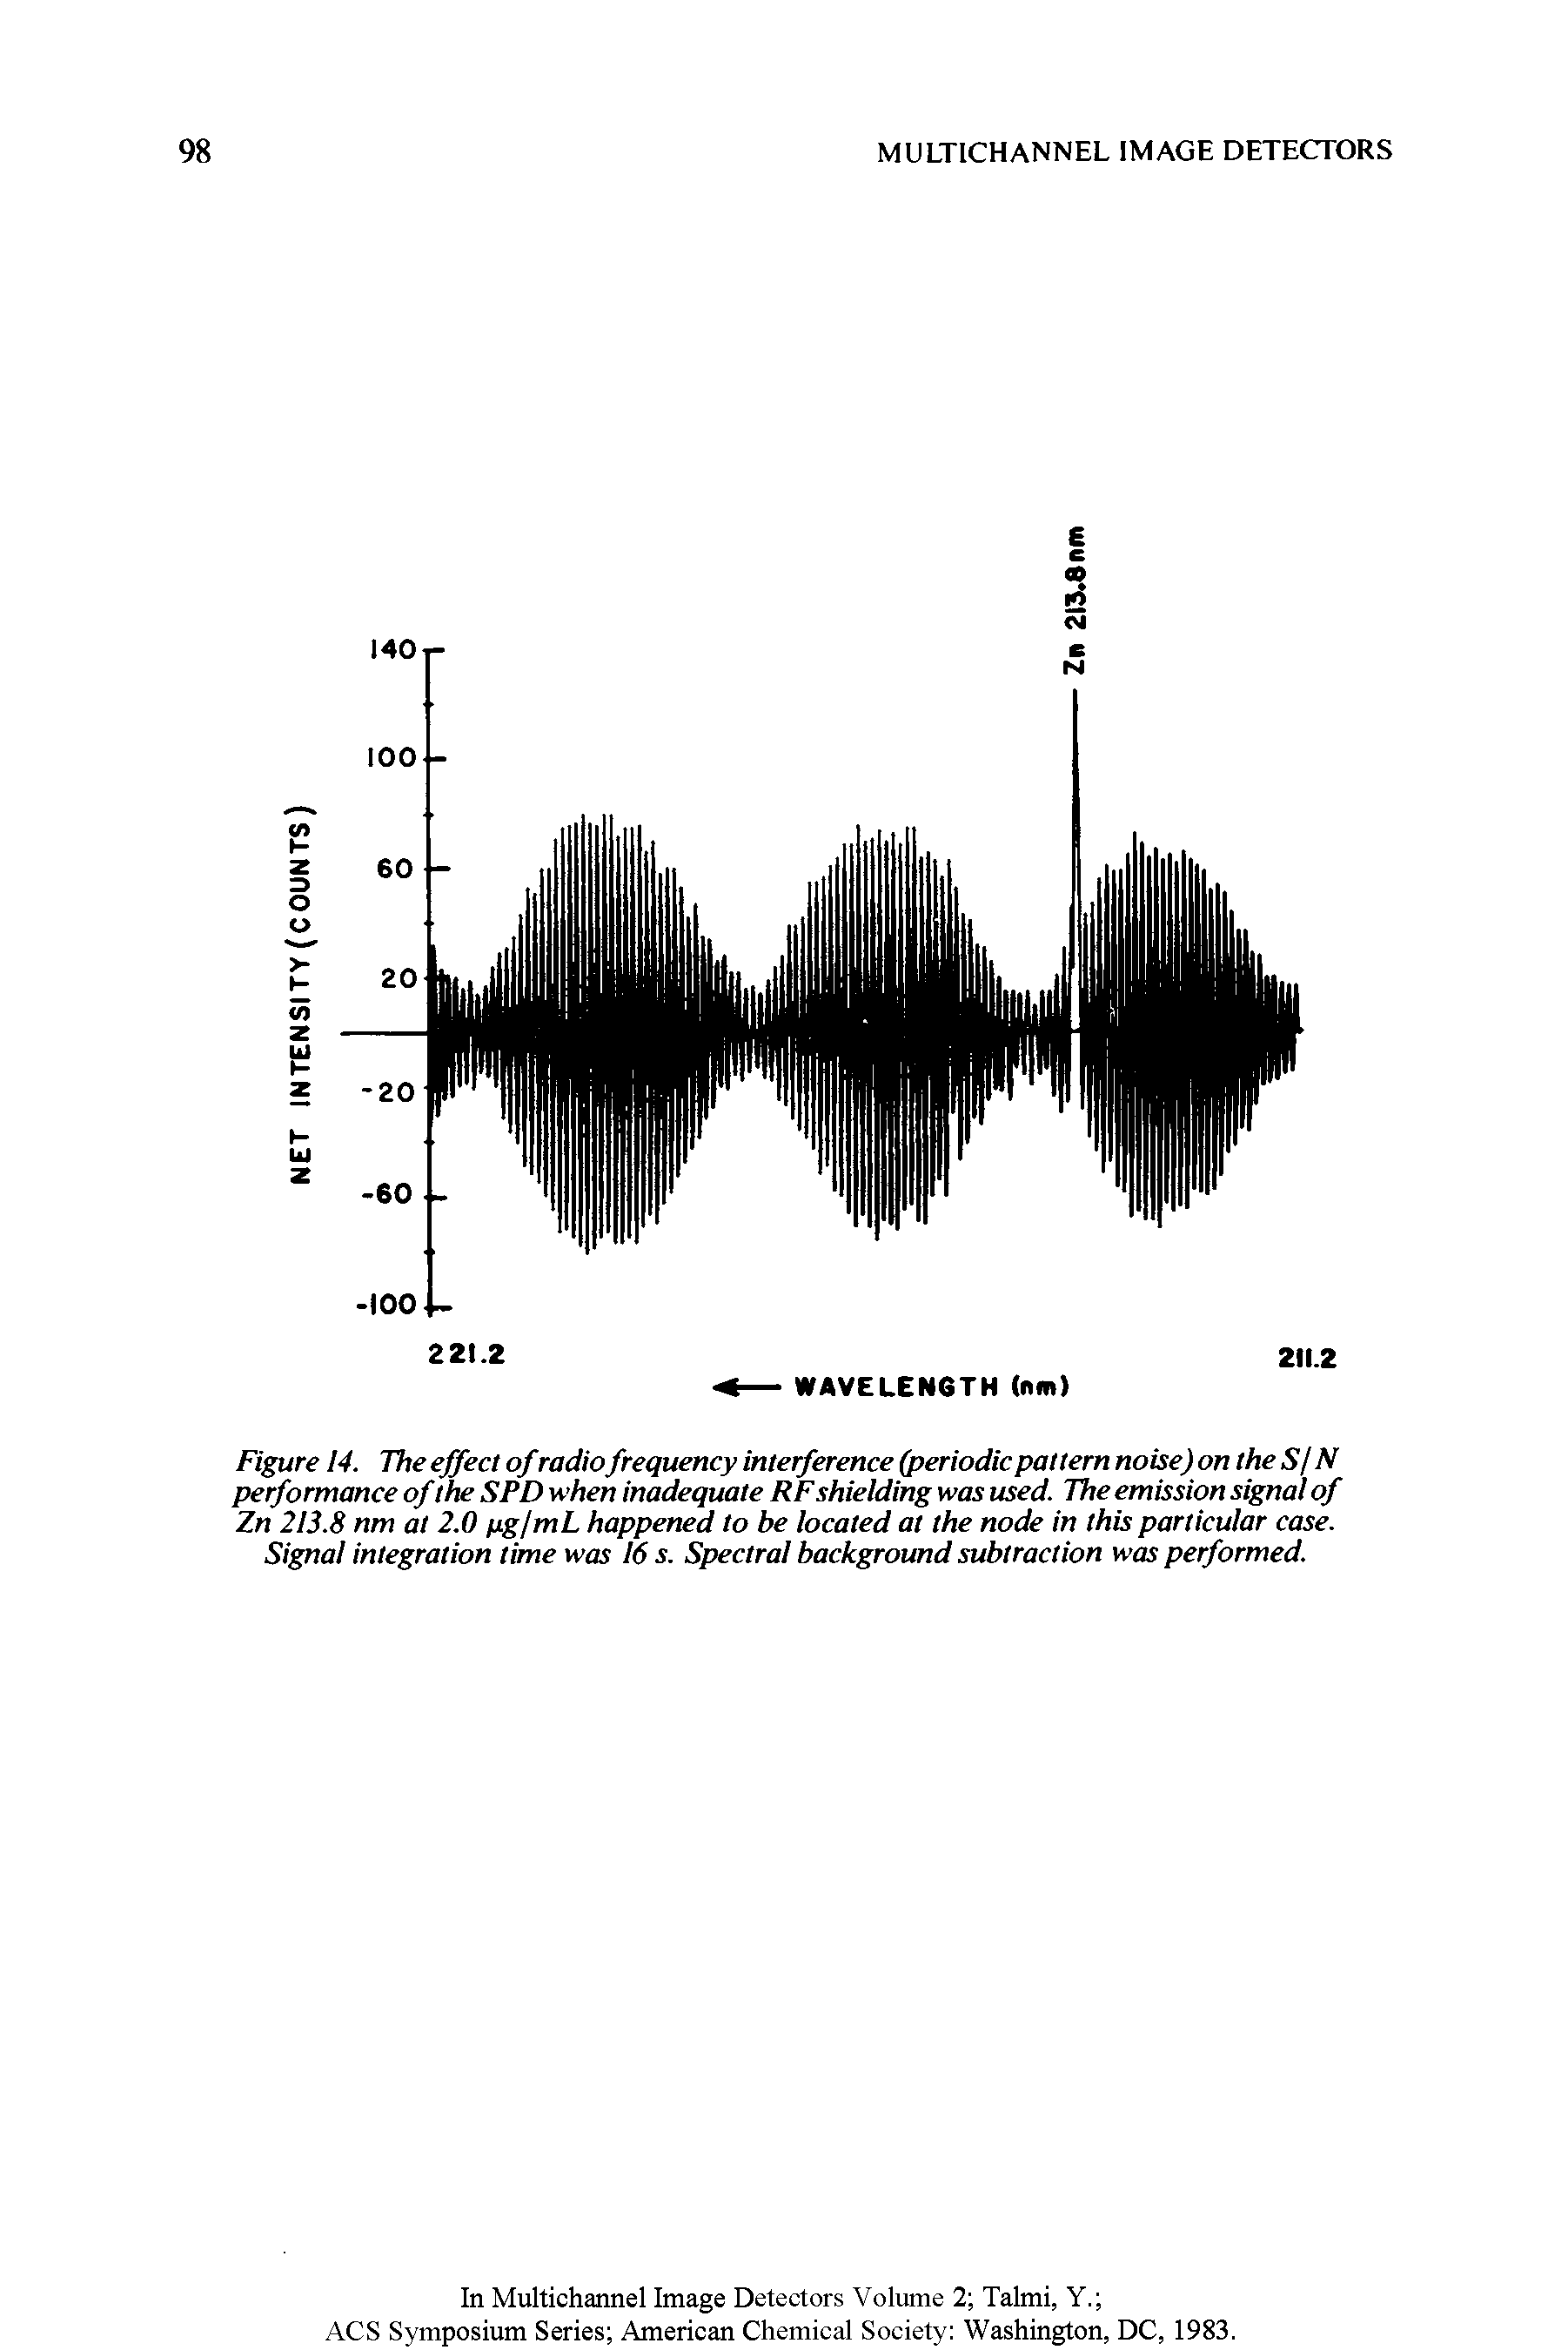 Figure 14. The effect of radio frequency interference (periodicpattern noise) on the S/ N performance of the SPD when inadequate RFshielding was used. The emission signal of Zn 213.8 nm at 2.0 pg/mL happened to be located at the node in this particular case. Signal integration time was 16 s. Spectra background subtraction was performed.